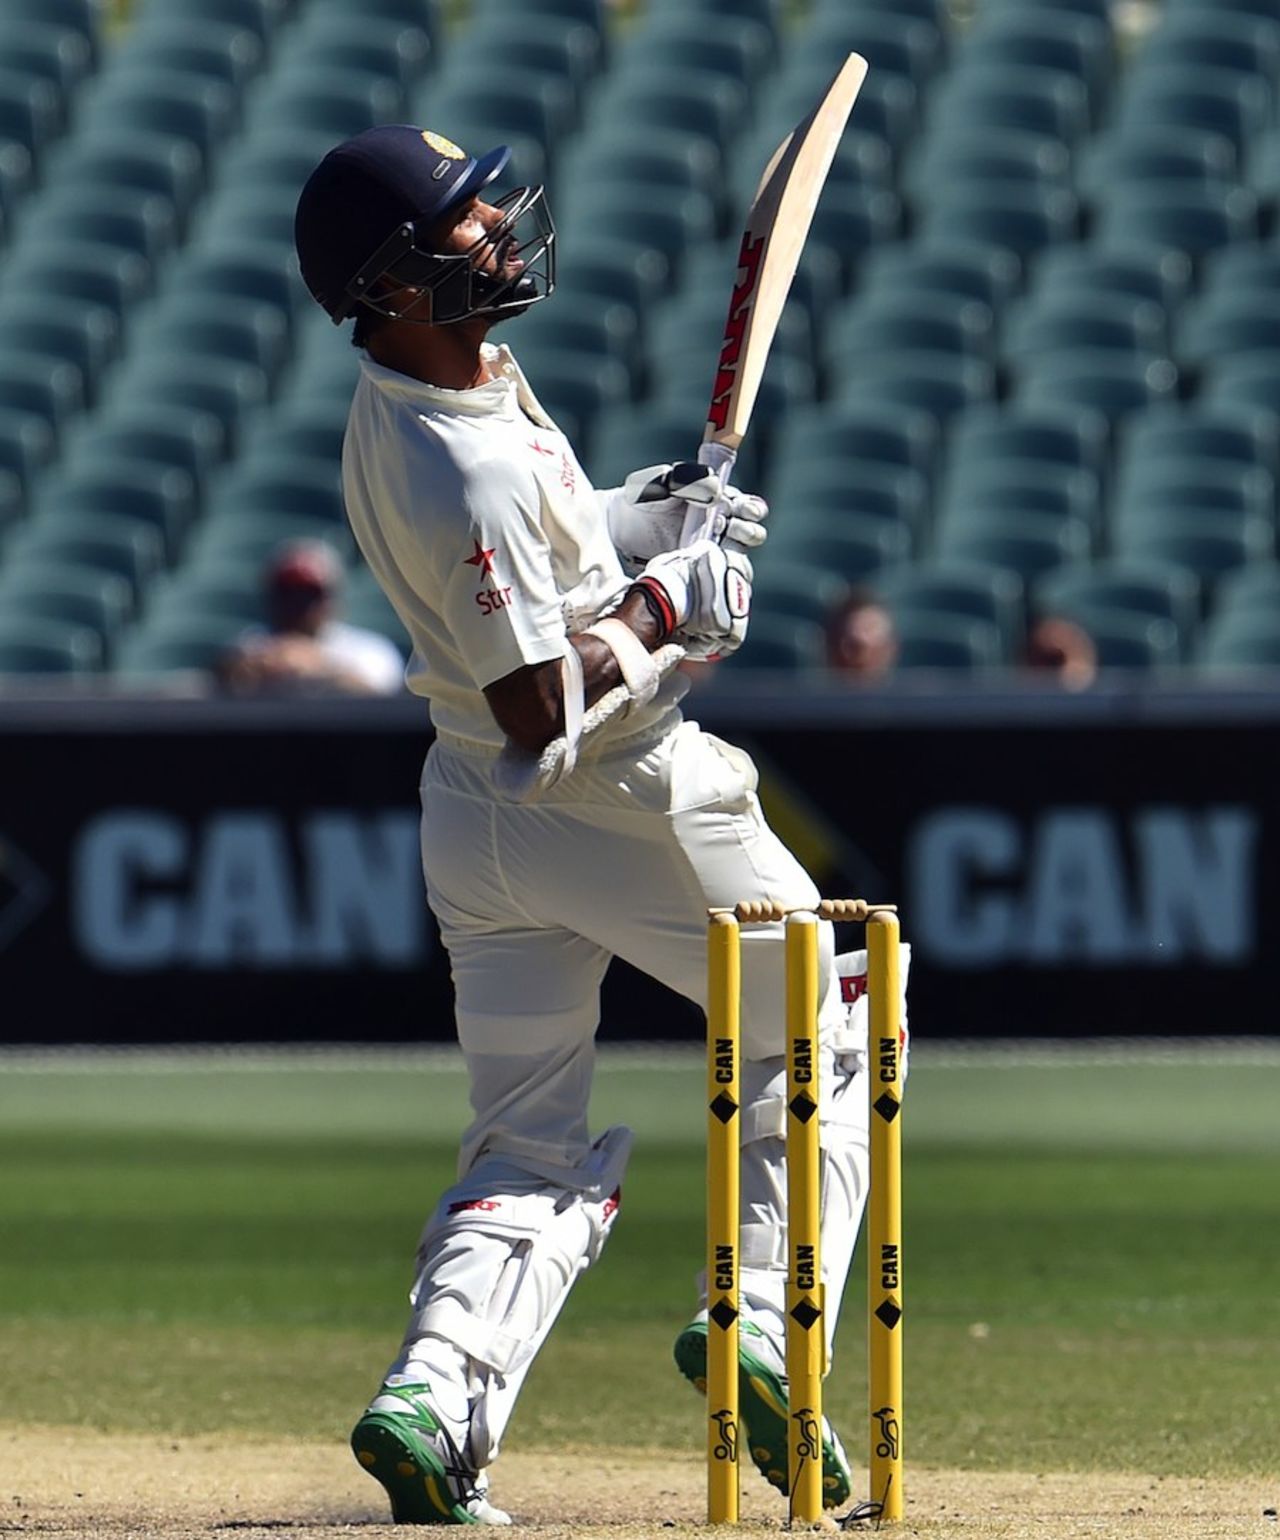 Shikhar Dhawan was given caught behind off his shoulder, Australia v India, 1st Test, Adelaide, 5th day, December 13, 2014